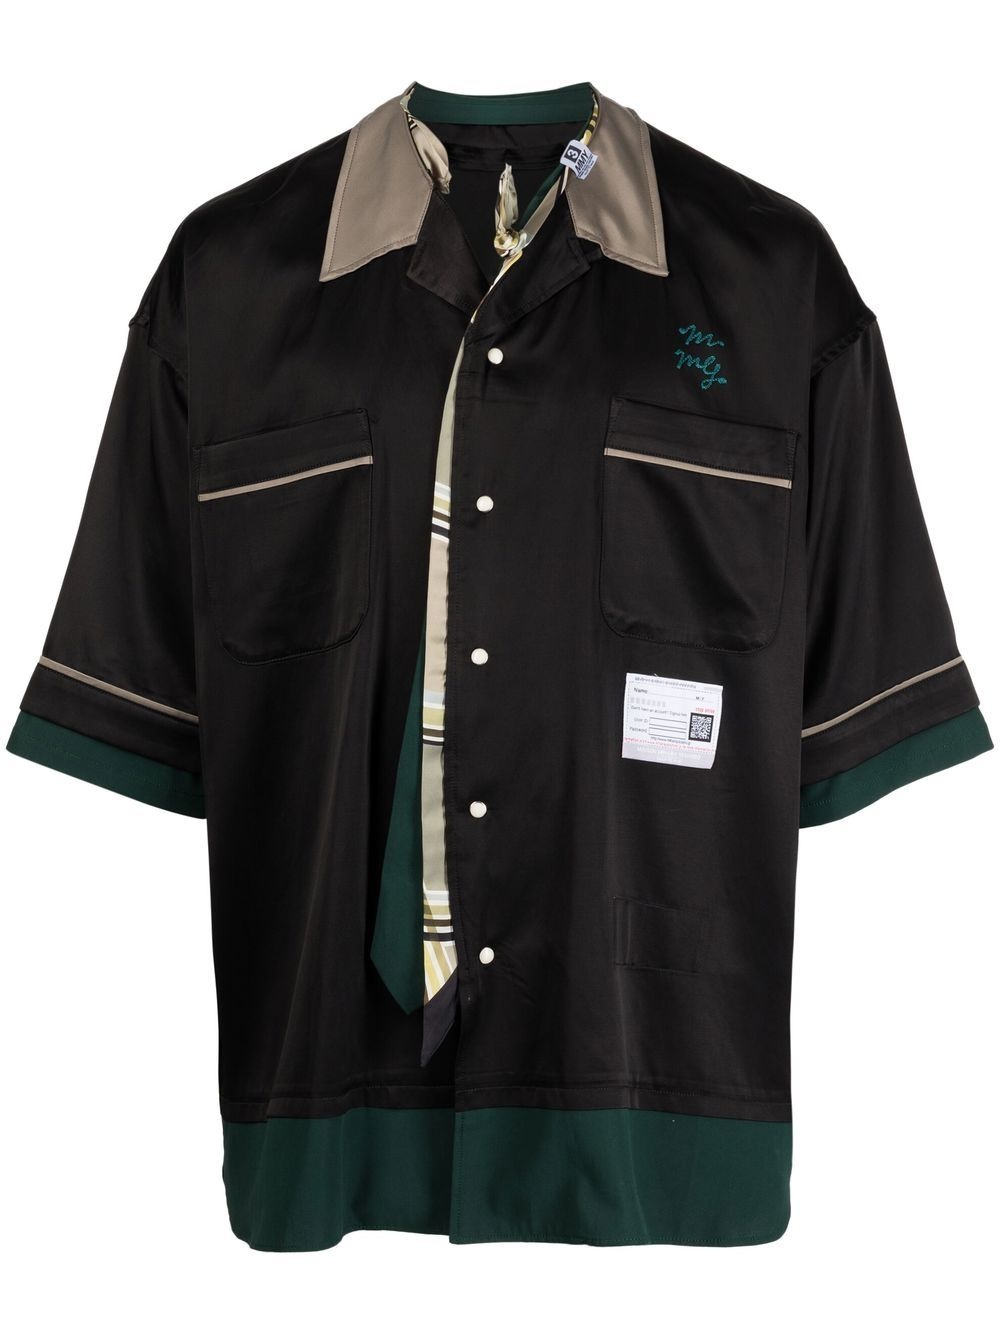 embroidered bowling shirt - 1